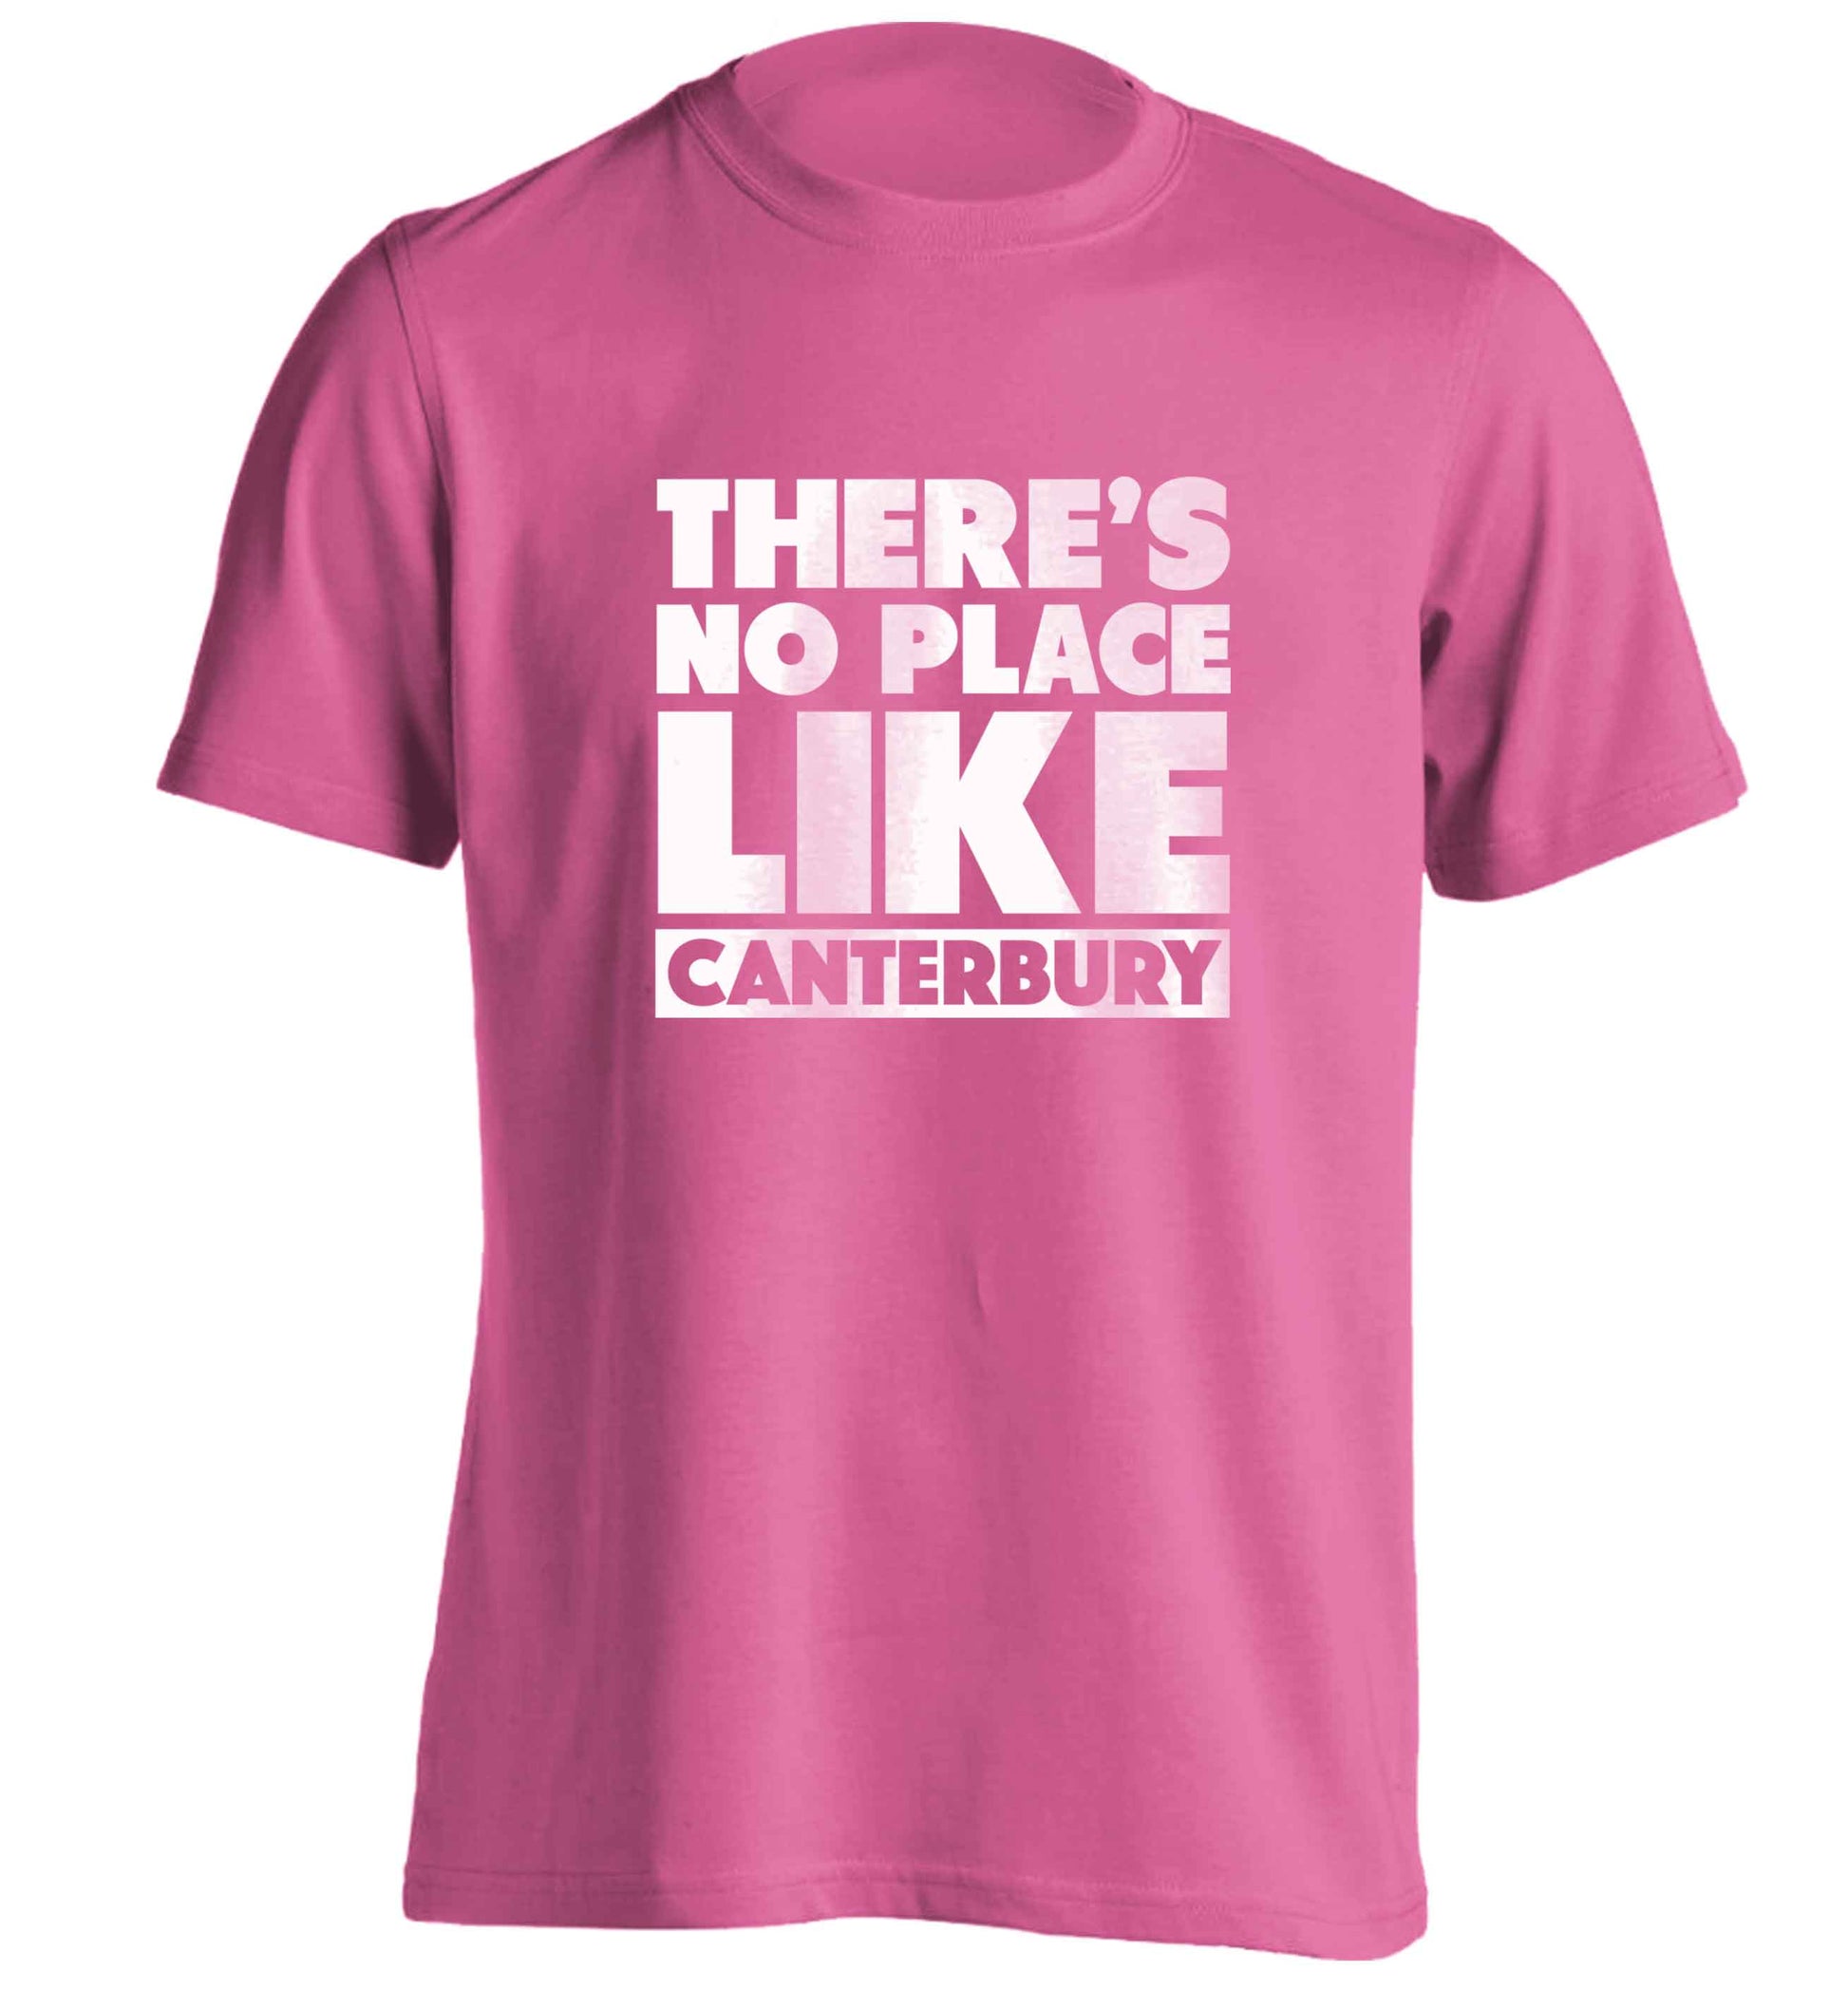 There's no place like Canterbury adults unisex pink Tshirt 2XL